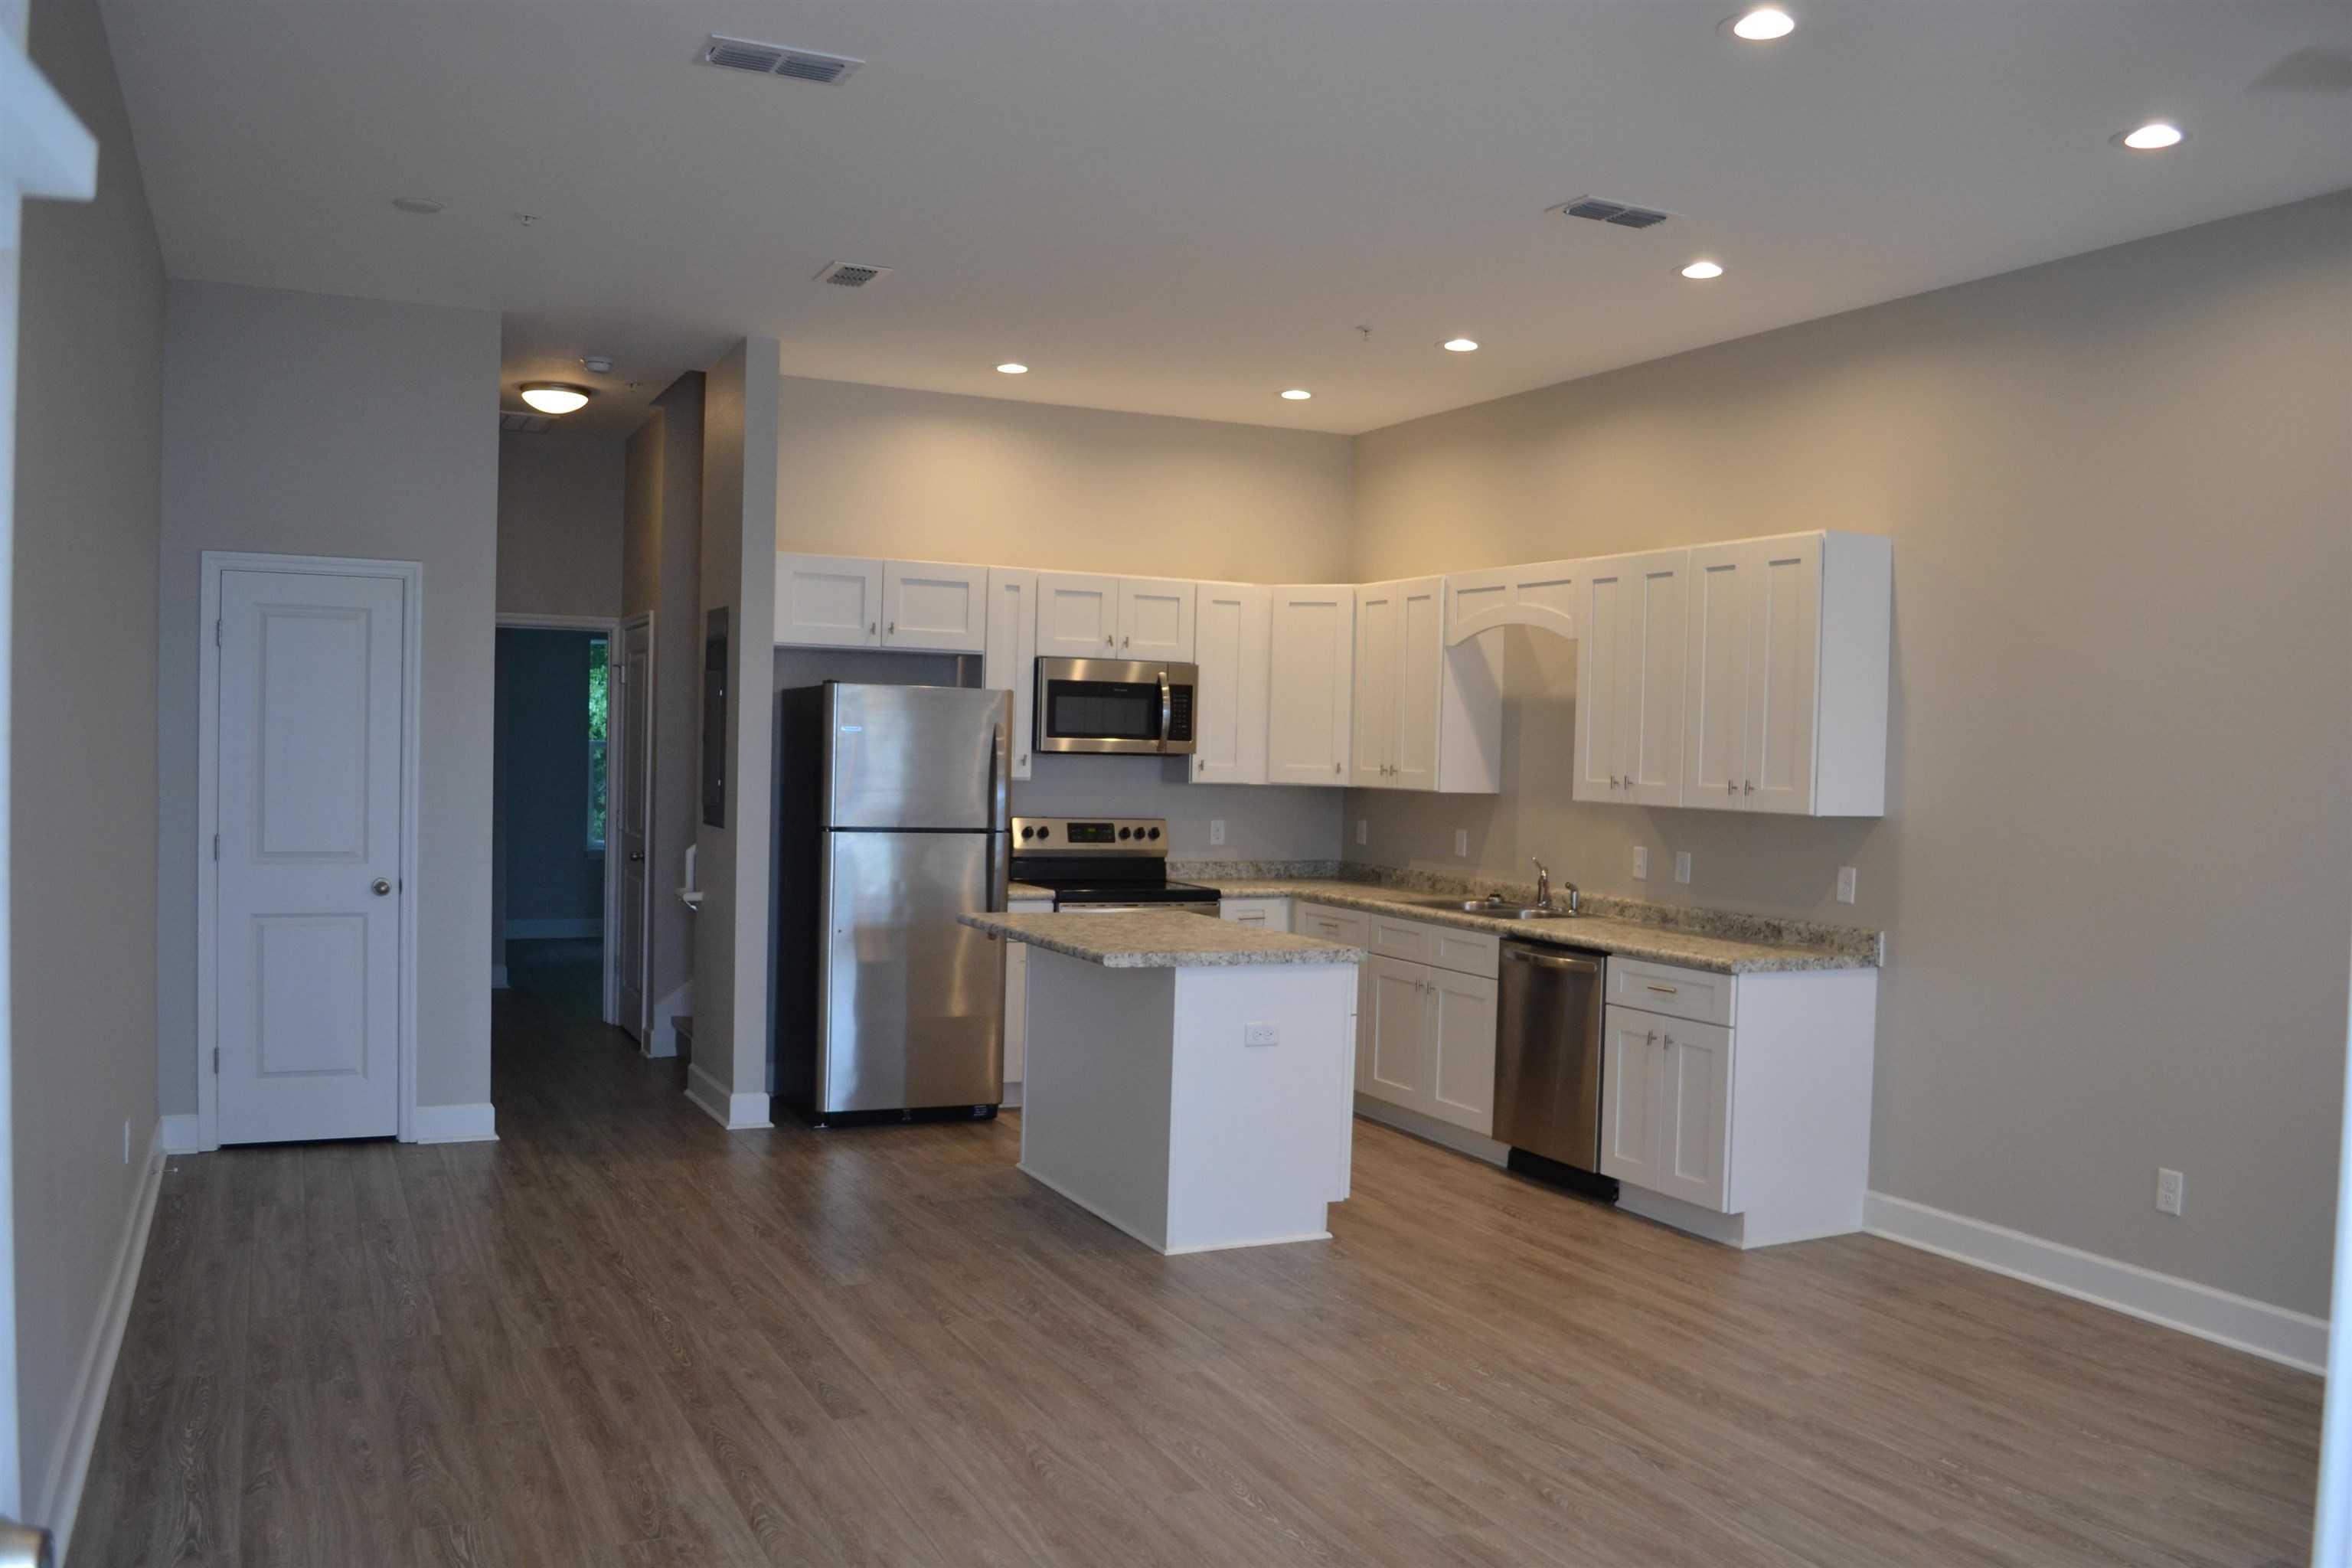 $2,000 - 3Br/4Ba -  for Sale in Oakland Parc, Tallahassee